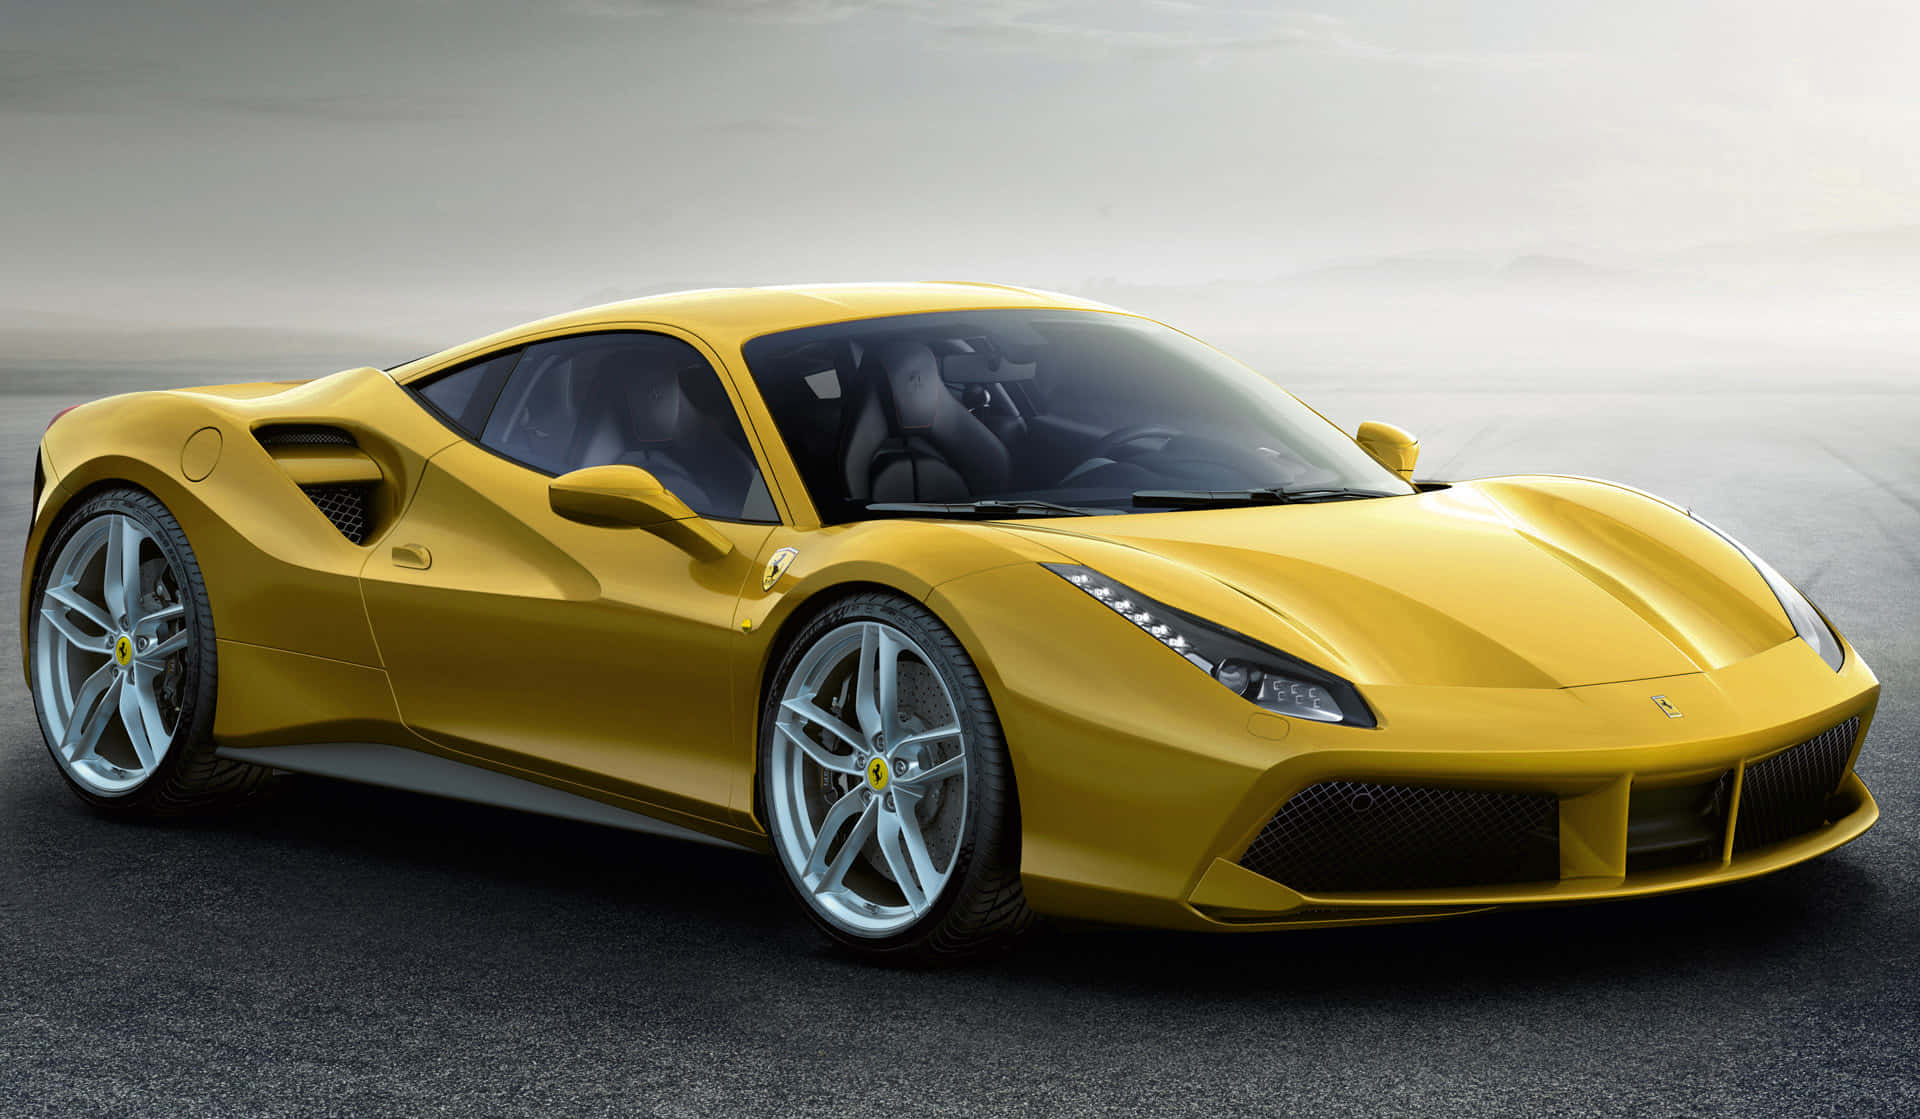 The stunning Ferrari 488 Spider in action on a scenic road Wallpaper